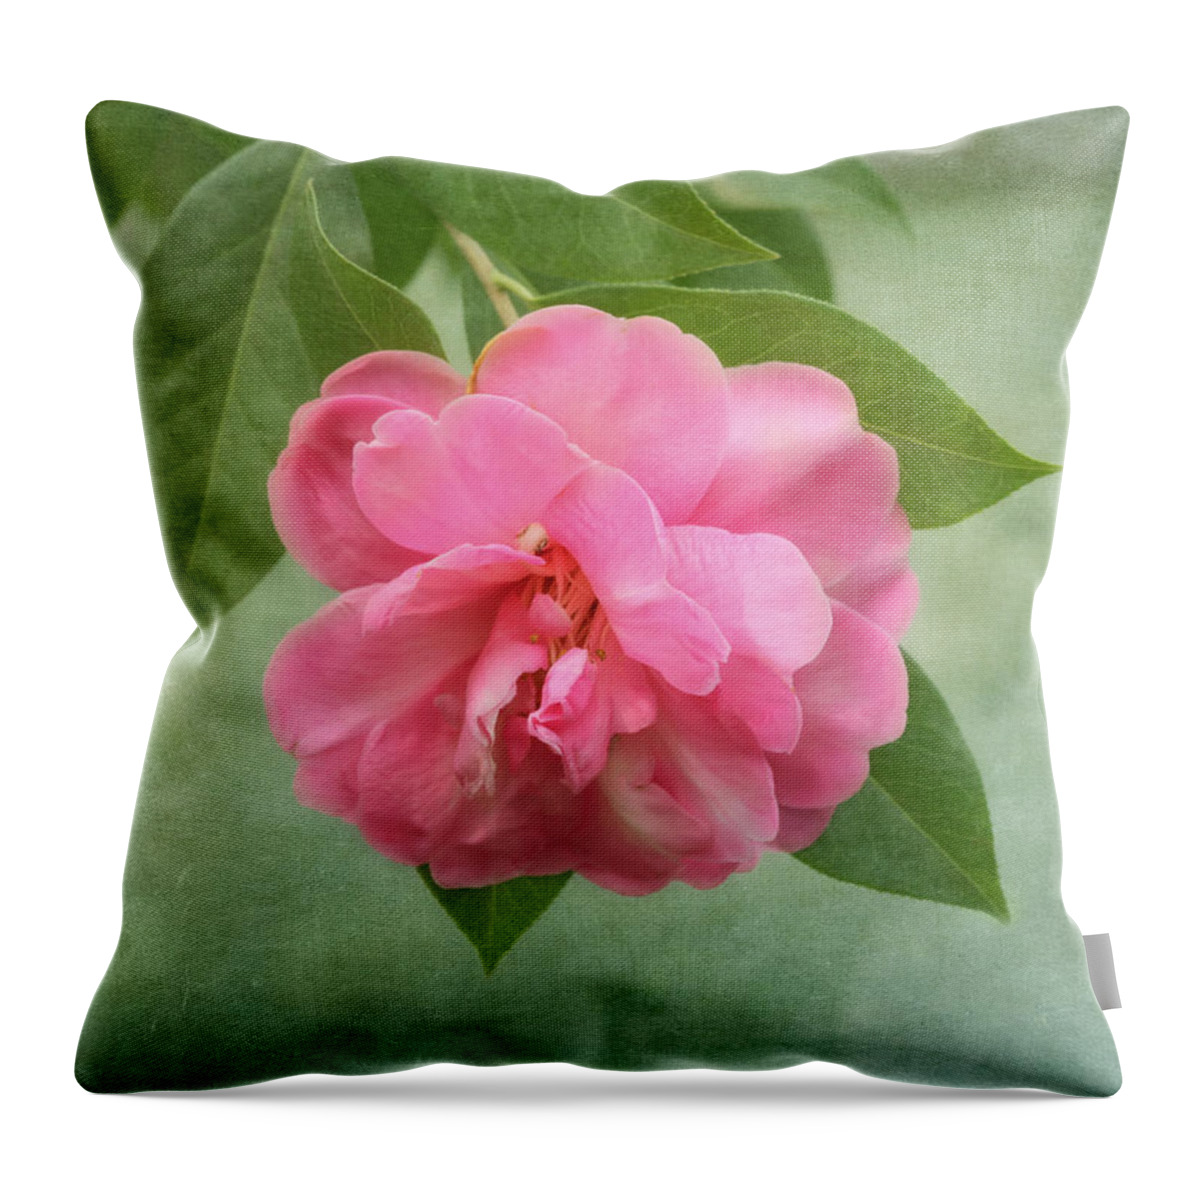 Flower Throw Pillow featuring the photograph Southern Camellia Flower by Kim Hojnacki